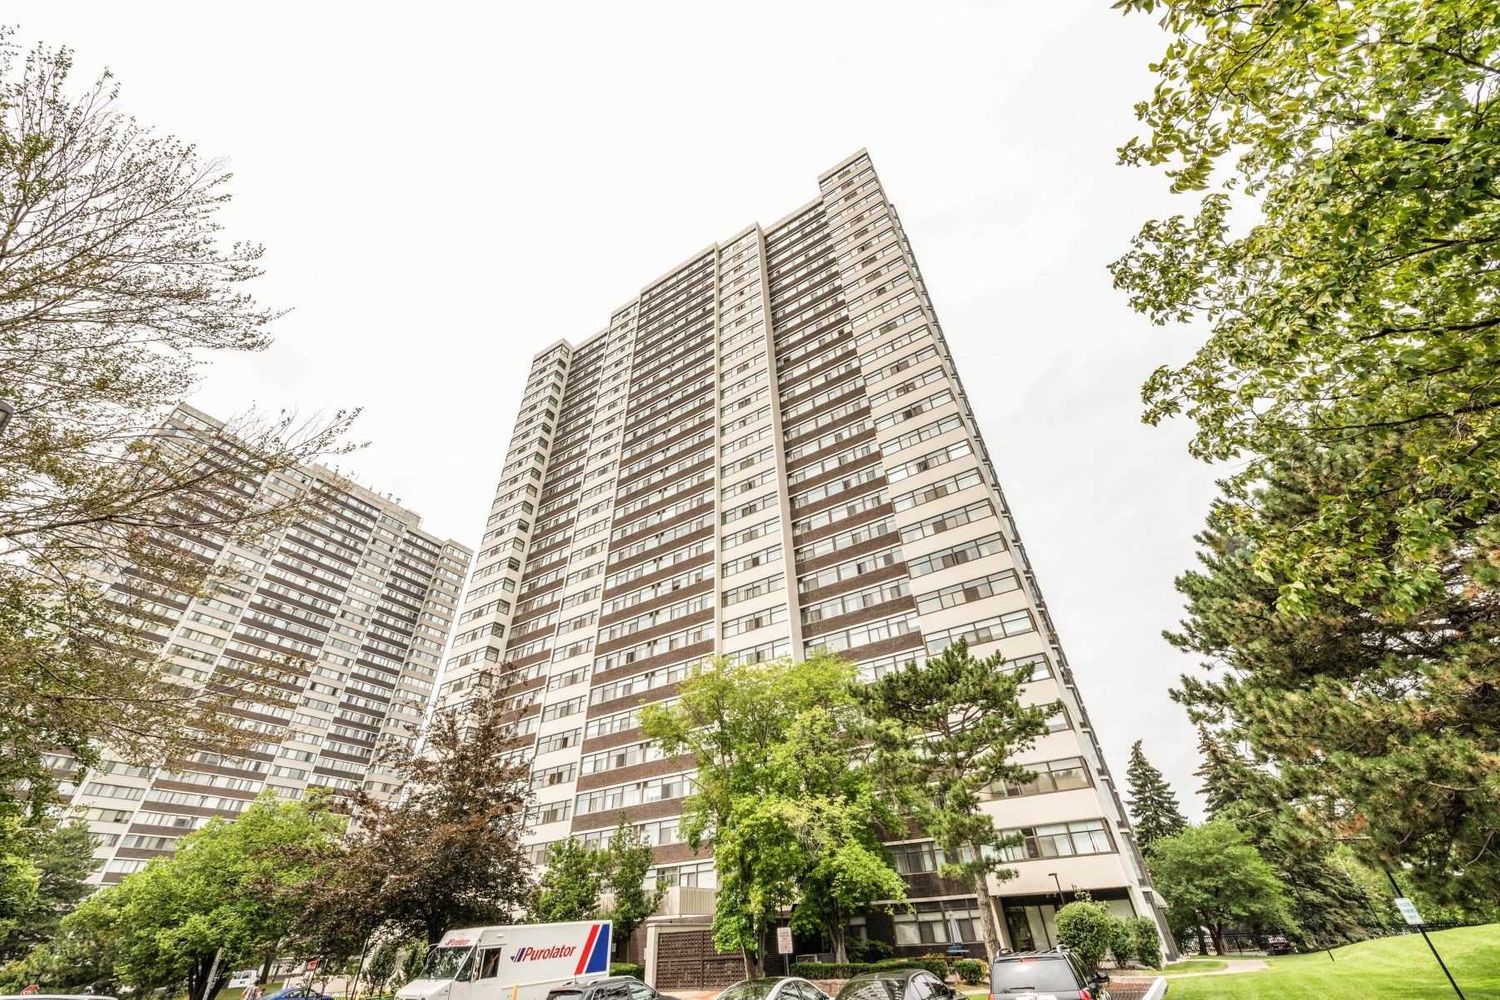 100 Antibes Drive. Antibes Court Condos is located in  North York, Toronto - image #1 of 2